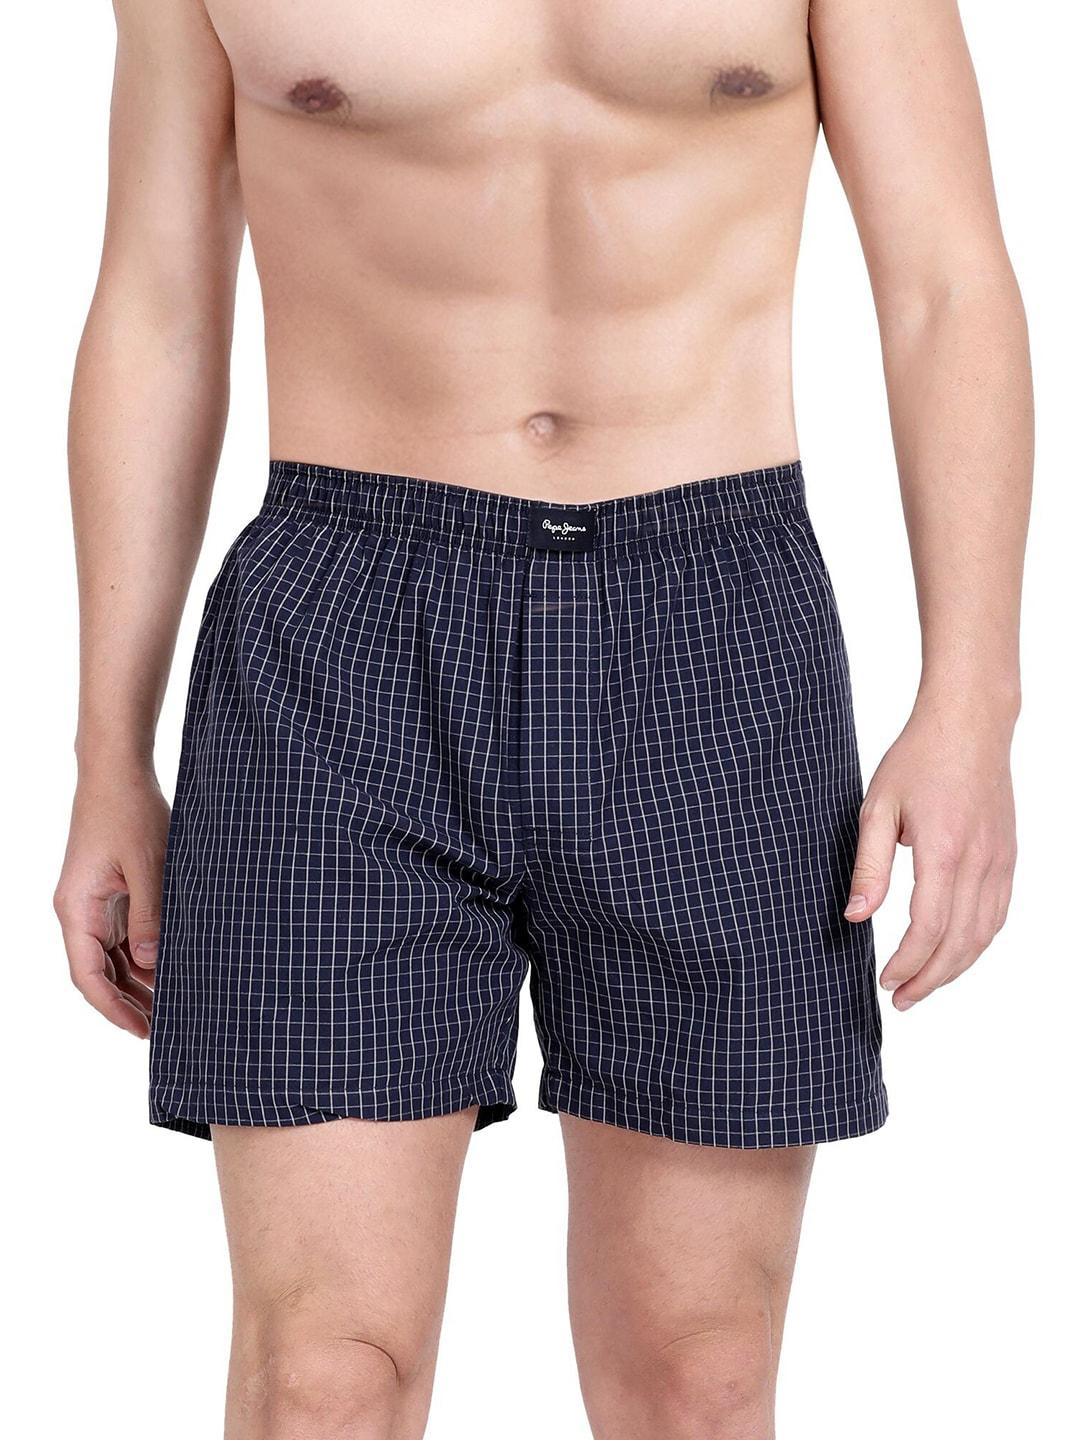 pepe jeans men navy blue & white checked boxers